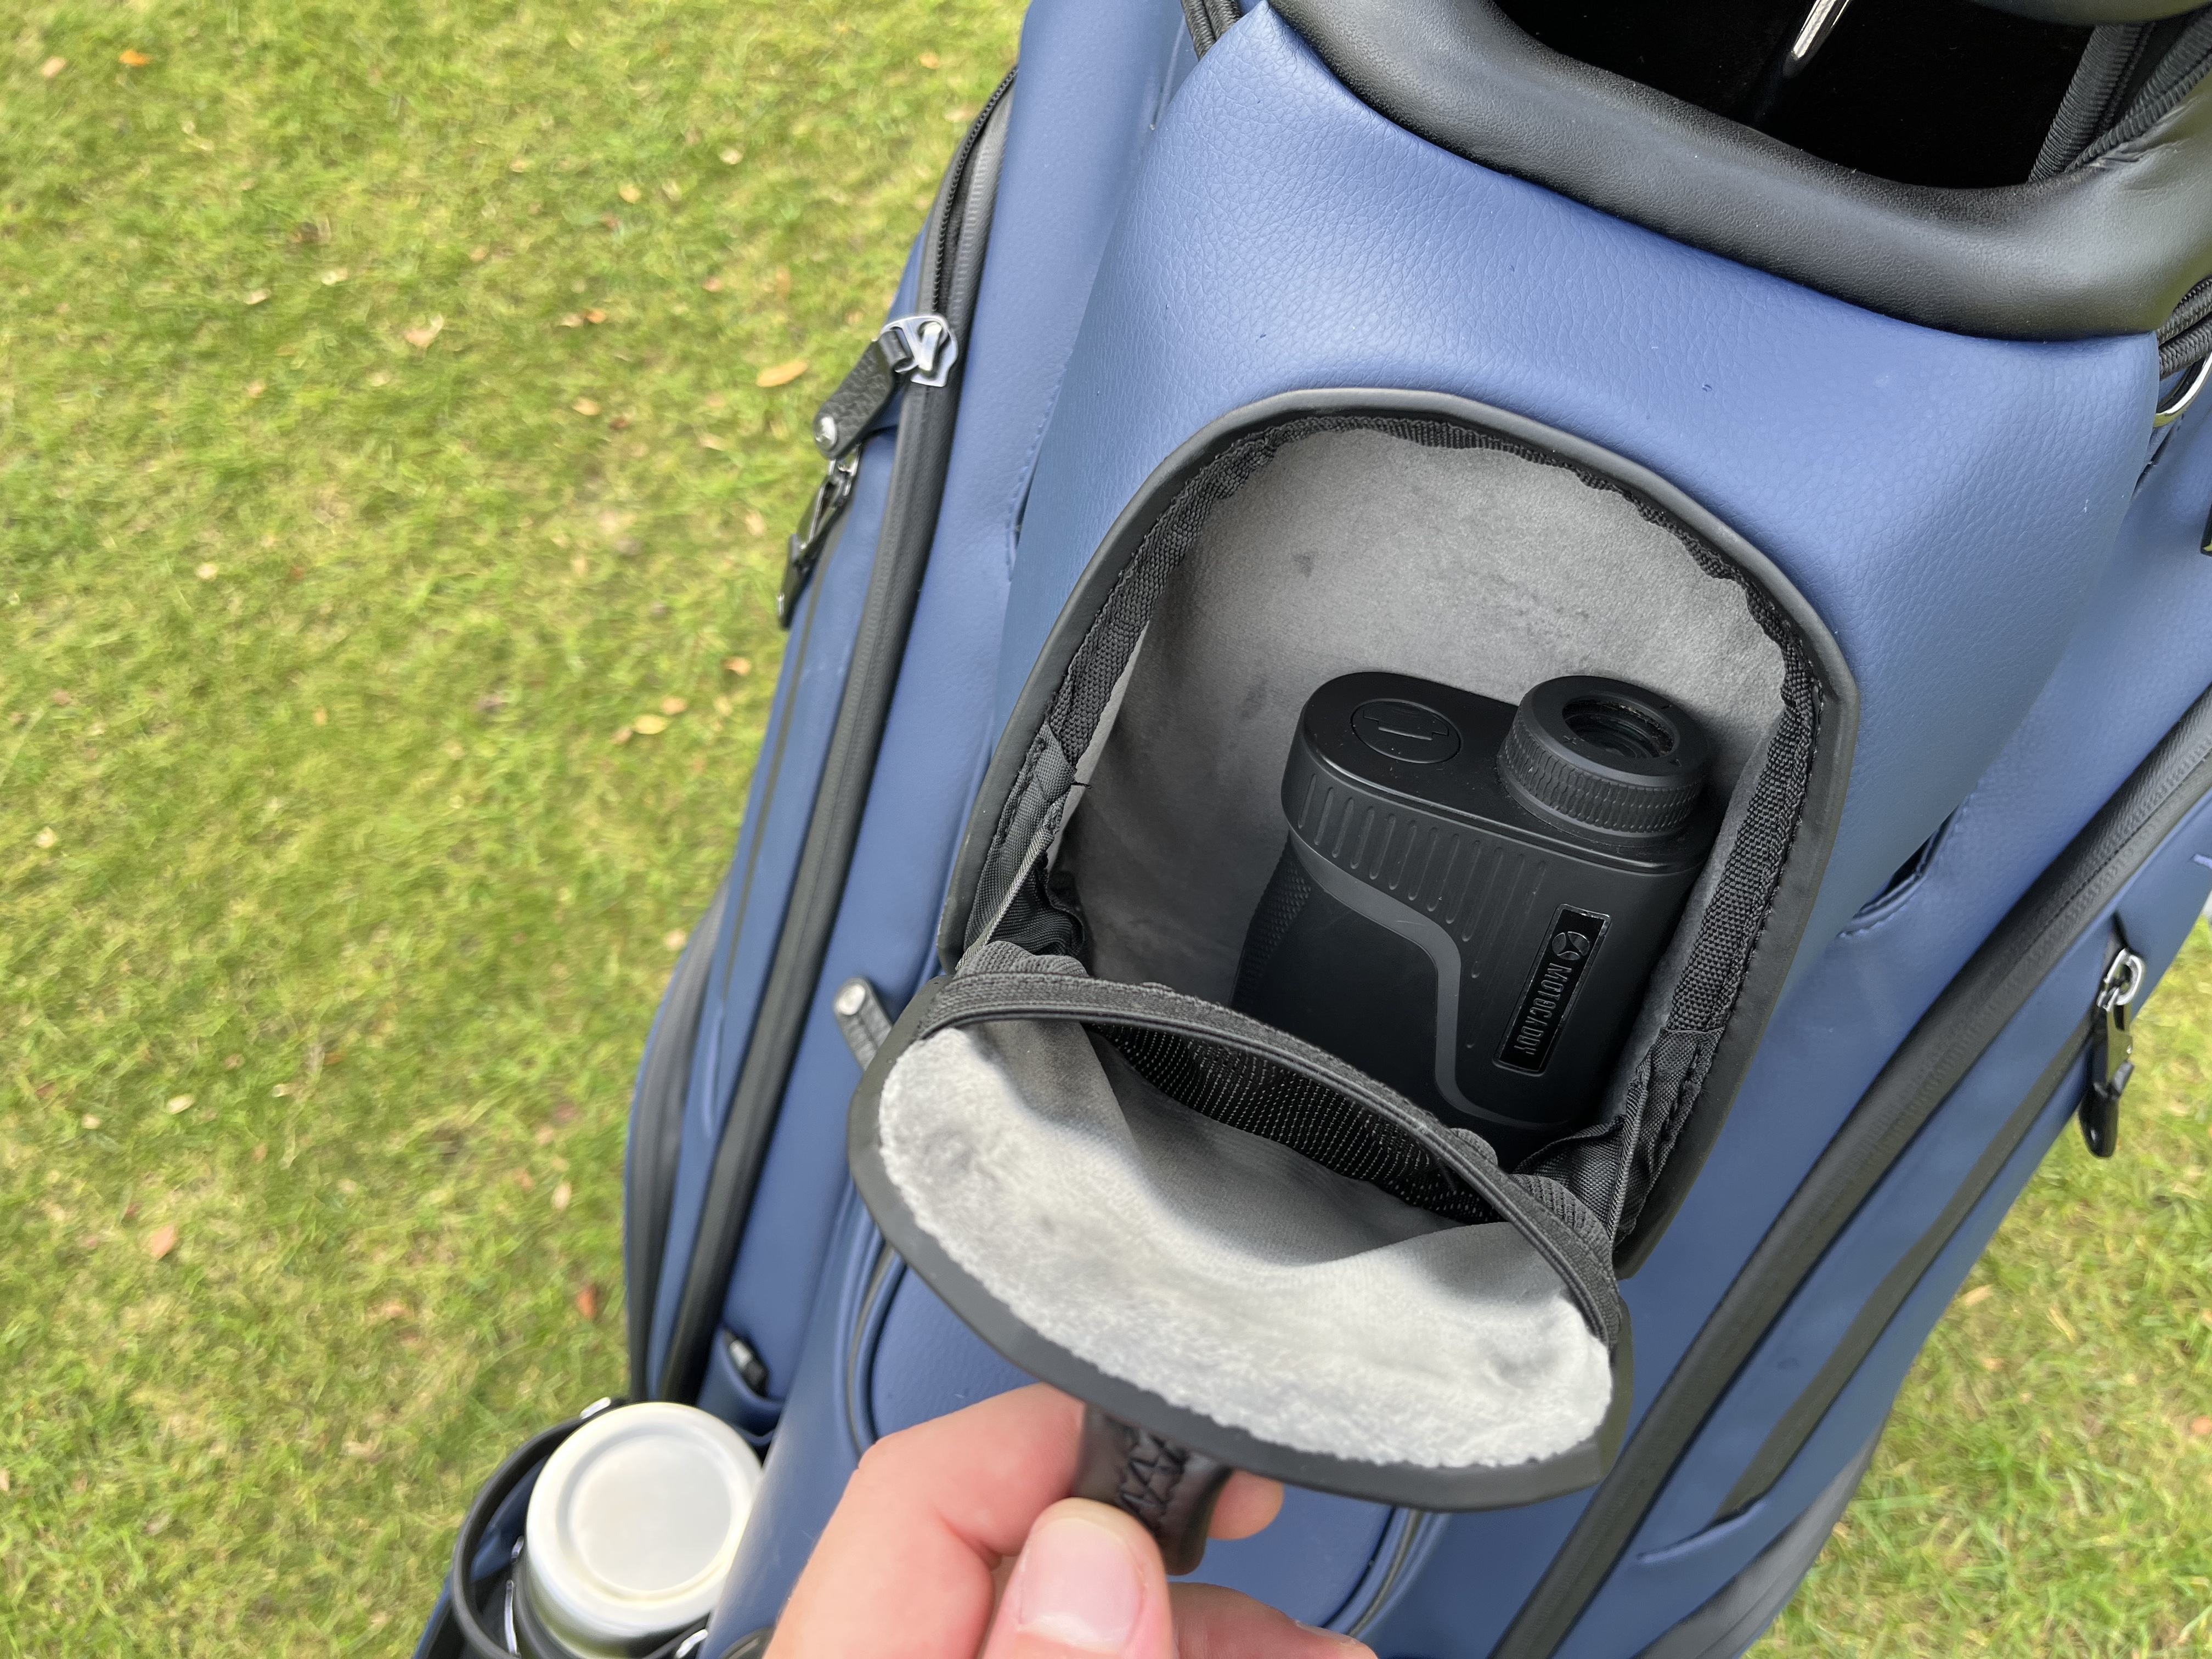 The magnetic front pocket of the Vessel Lux XV 2.0 cart bag